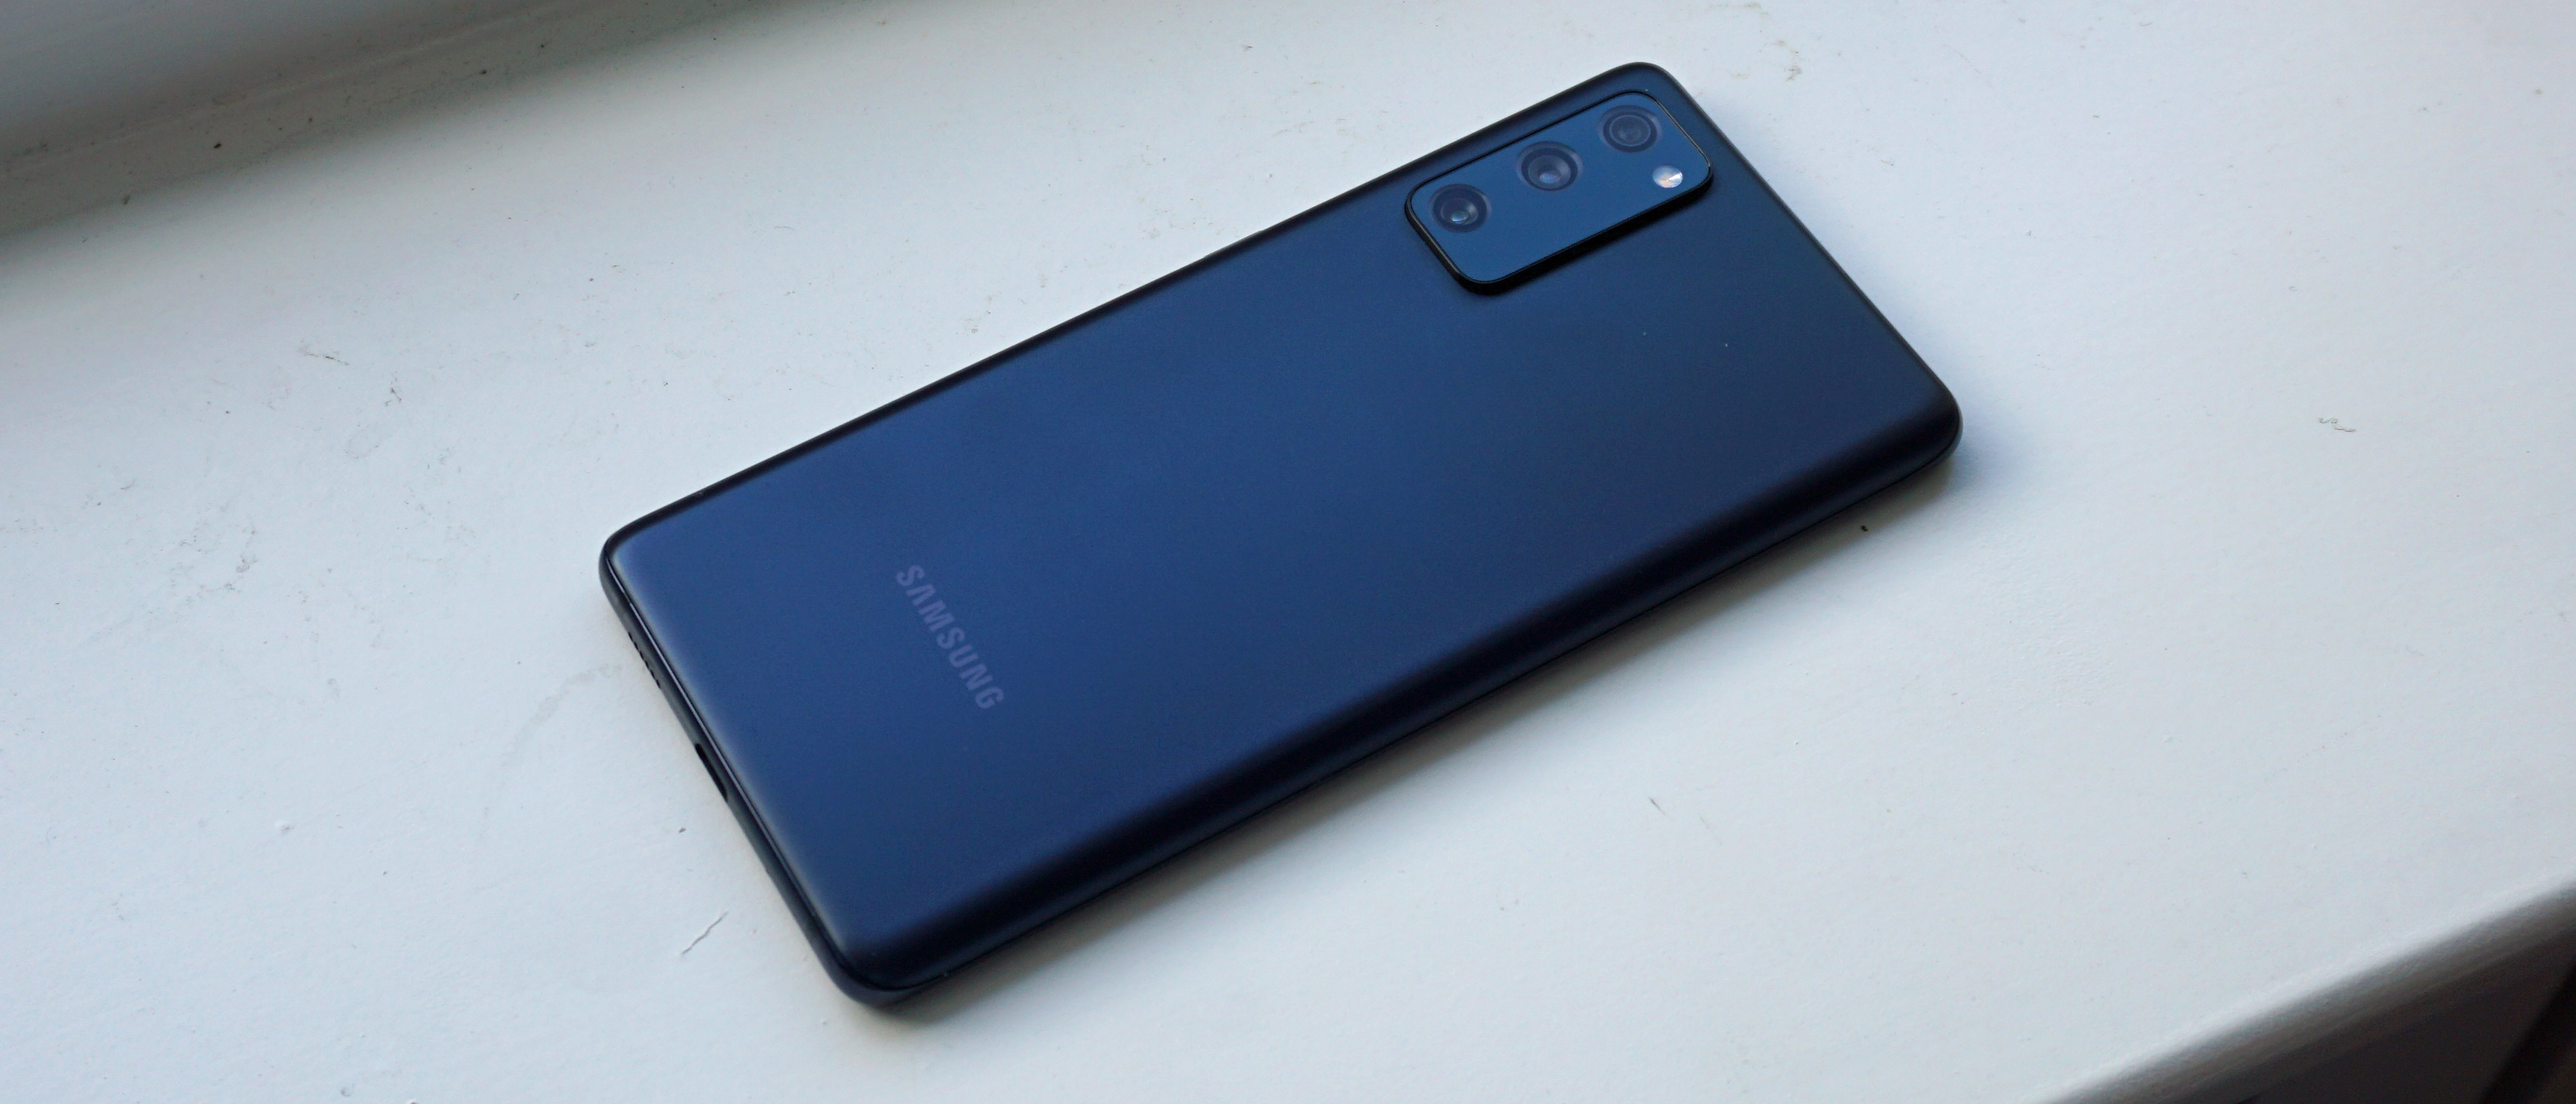 Samsung Galaxy S20 FE review: an old but still tempting Android mid-ranger